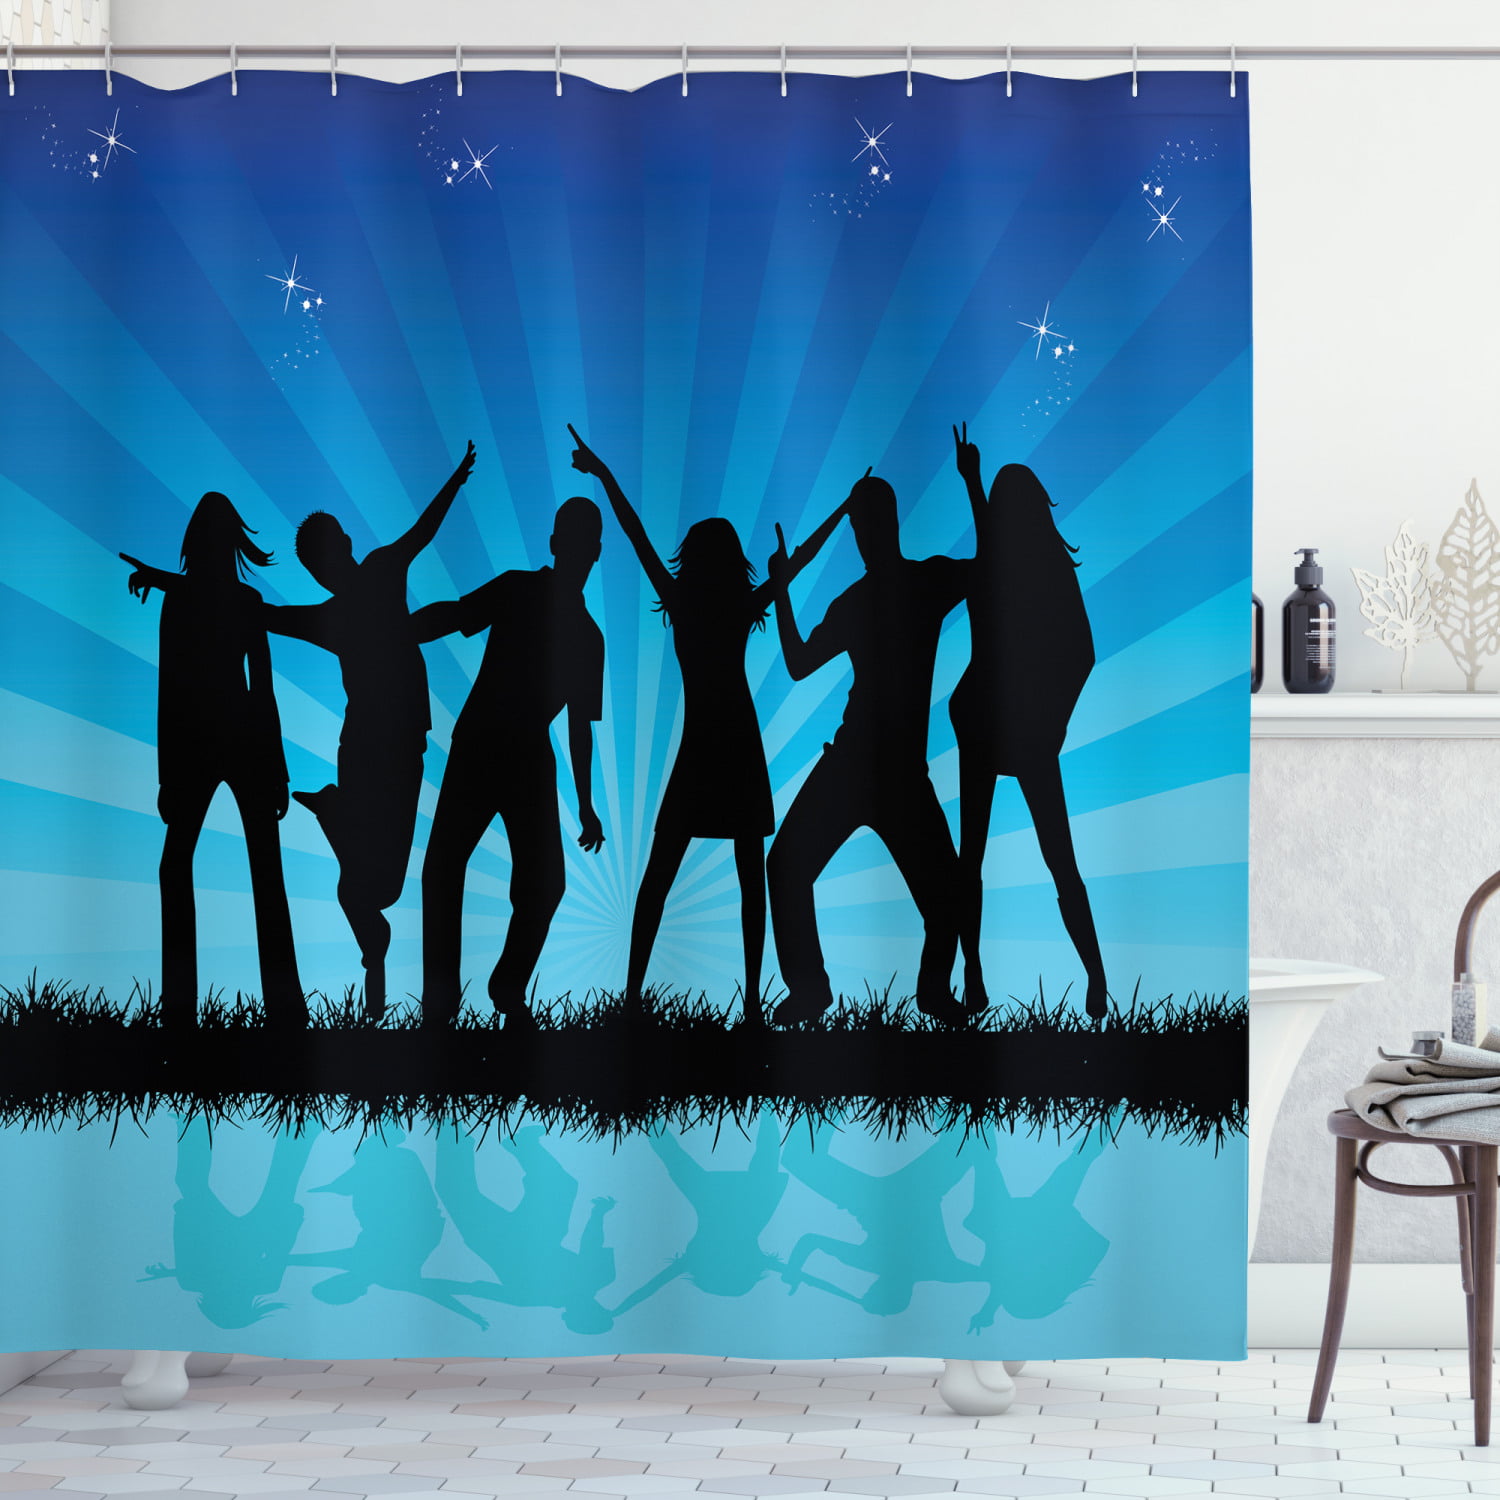 Party Lights Dancing Crowd Shower Curtain Liner Bathroom Polyester Fabric Hooks 